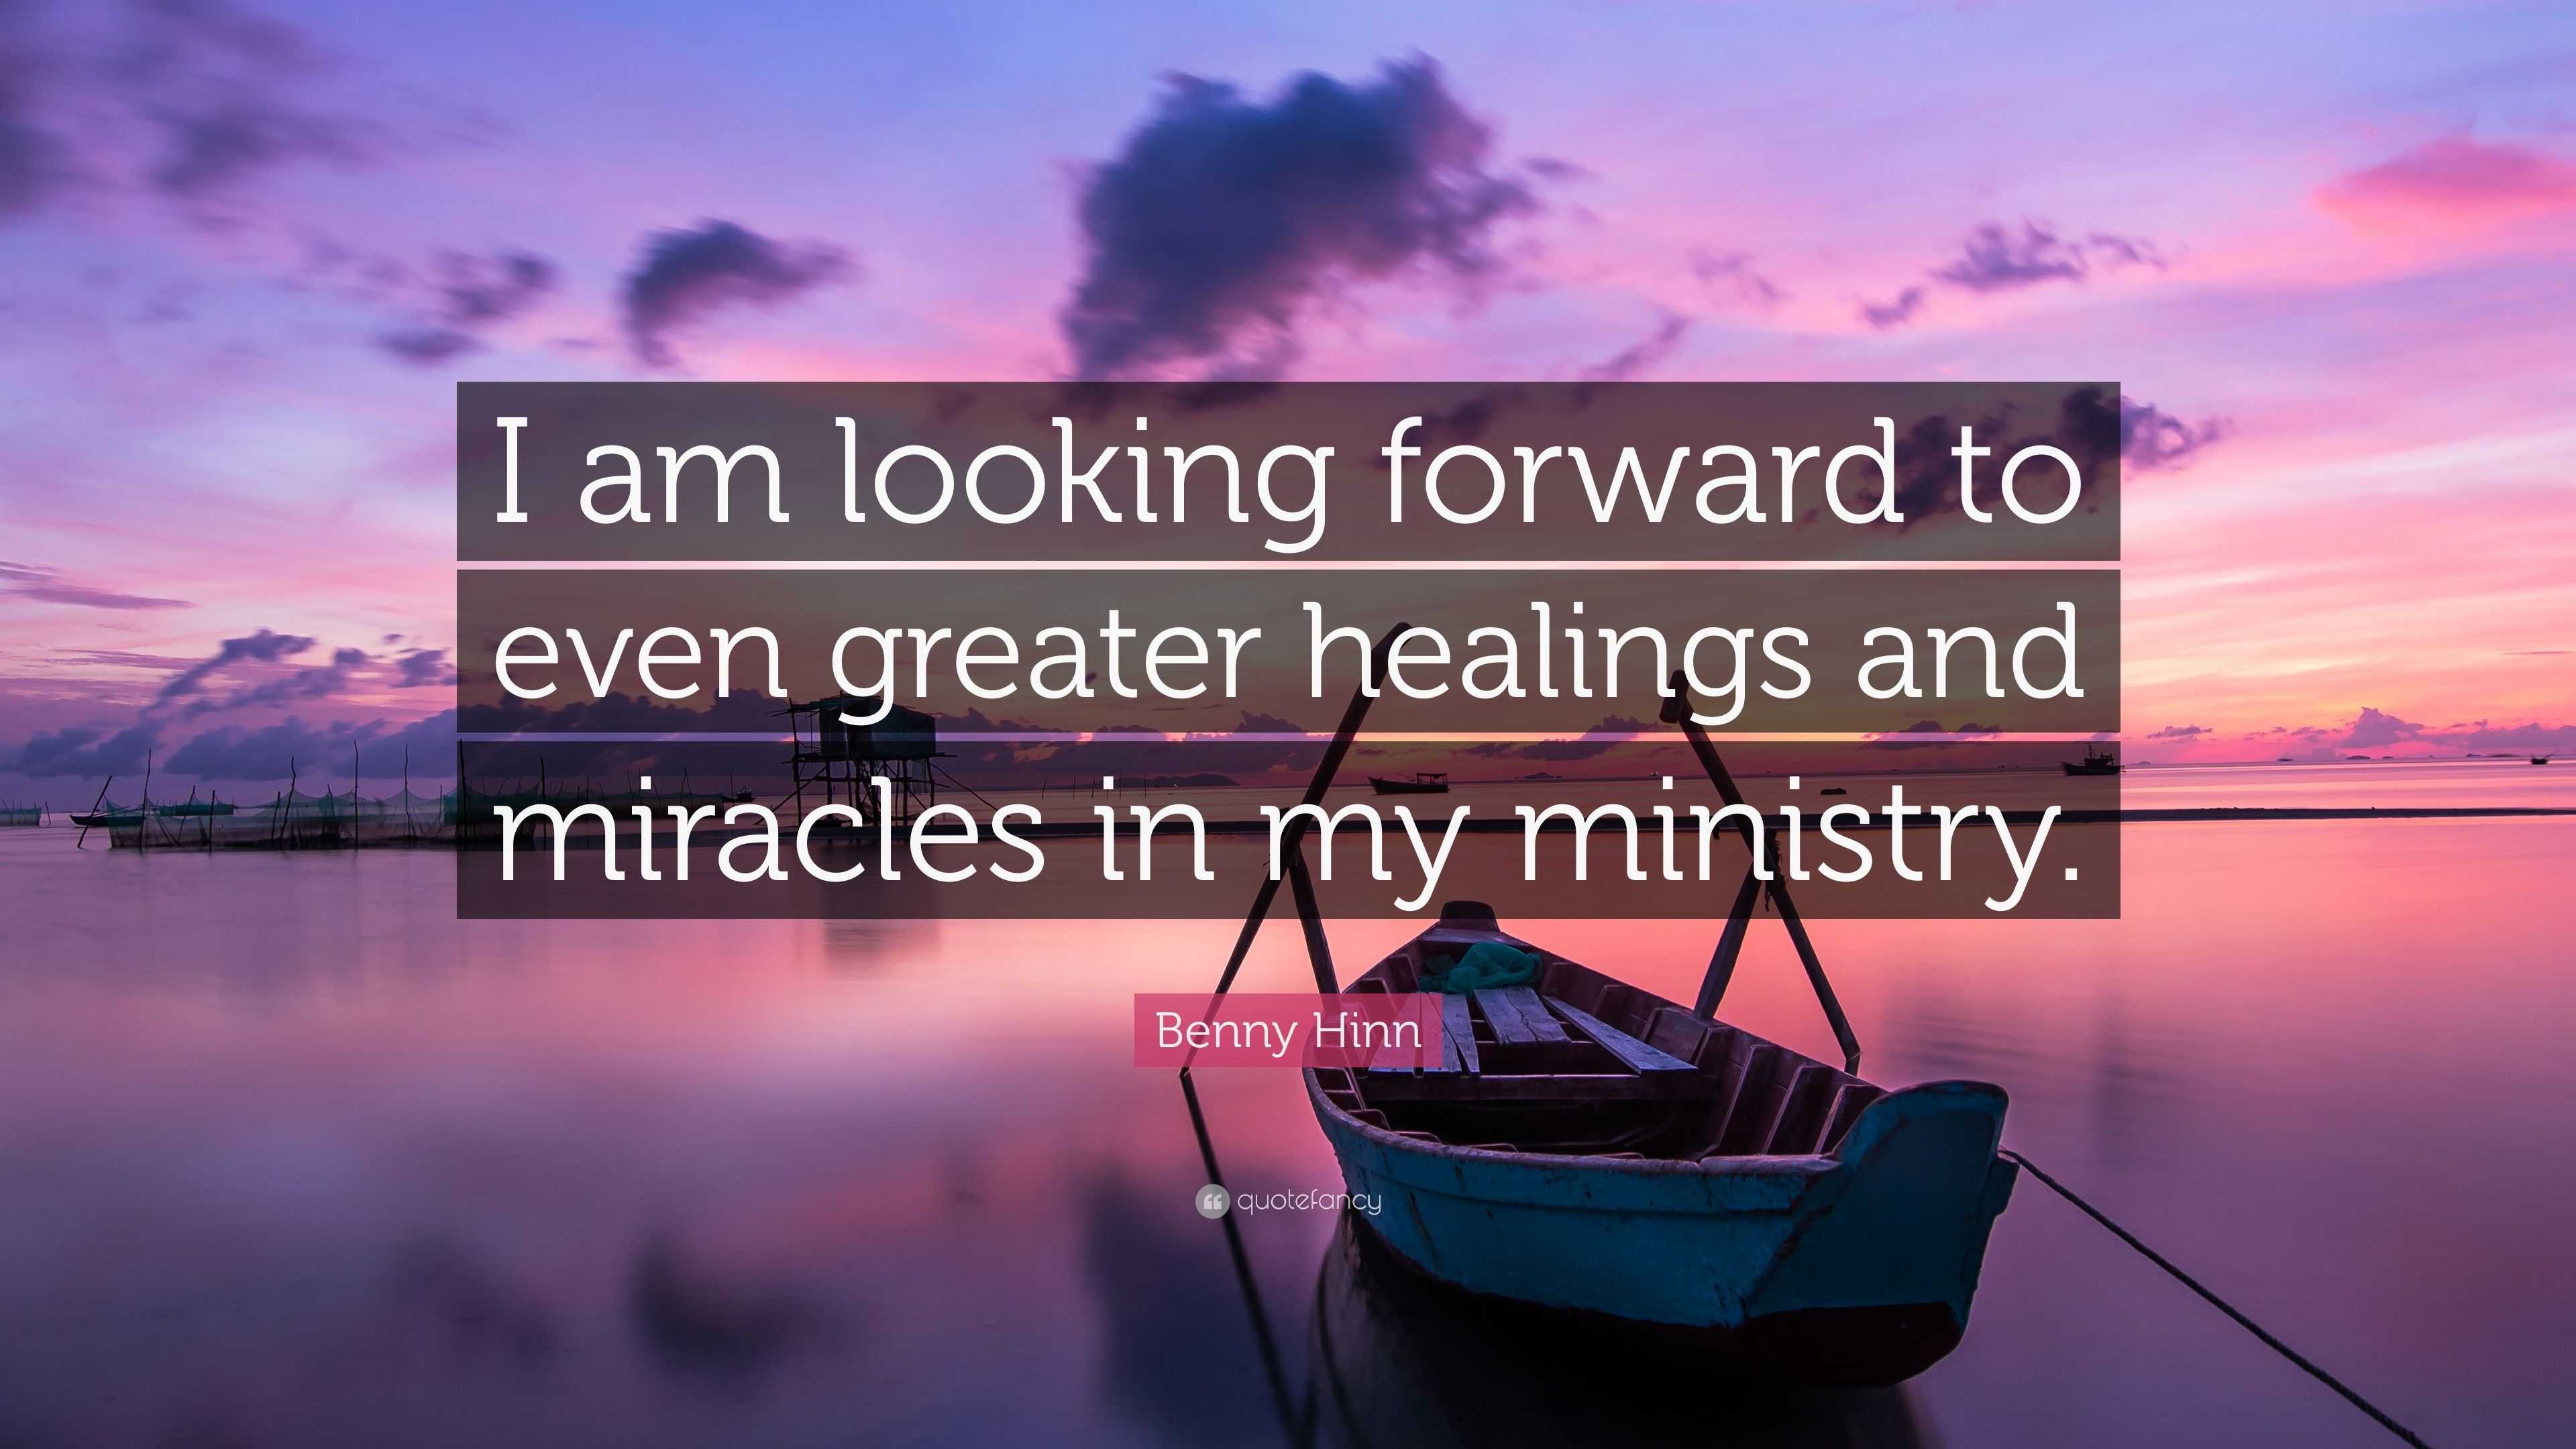 Benny Hinn Quote: “I am looking forward to even greater healings and  miracles in my ministry.”